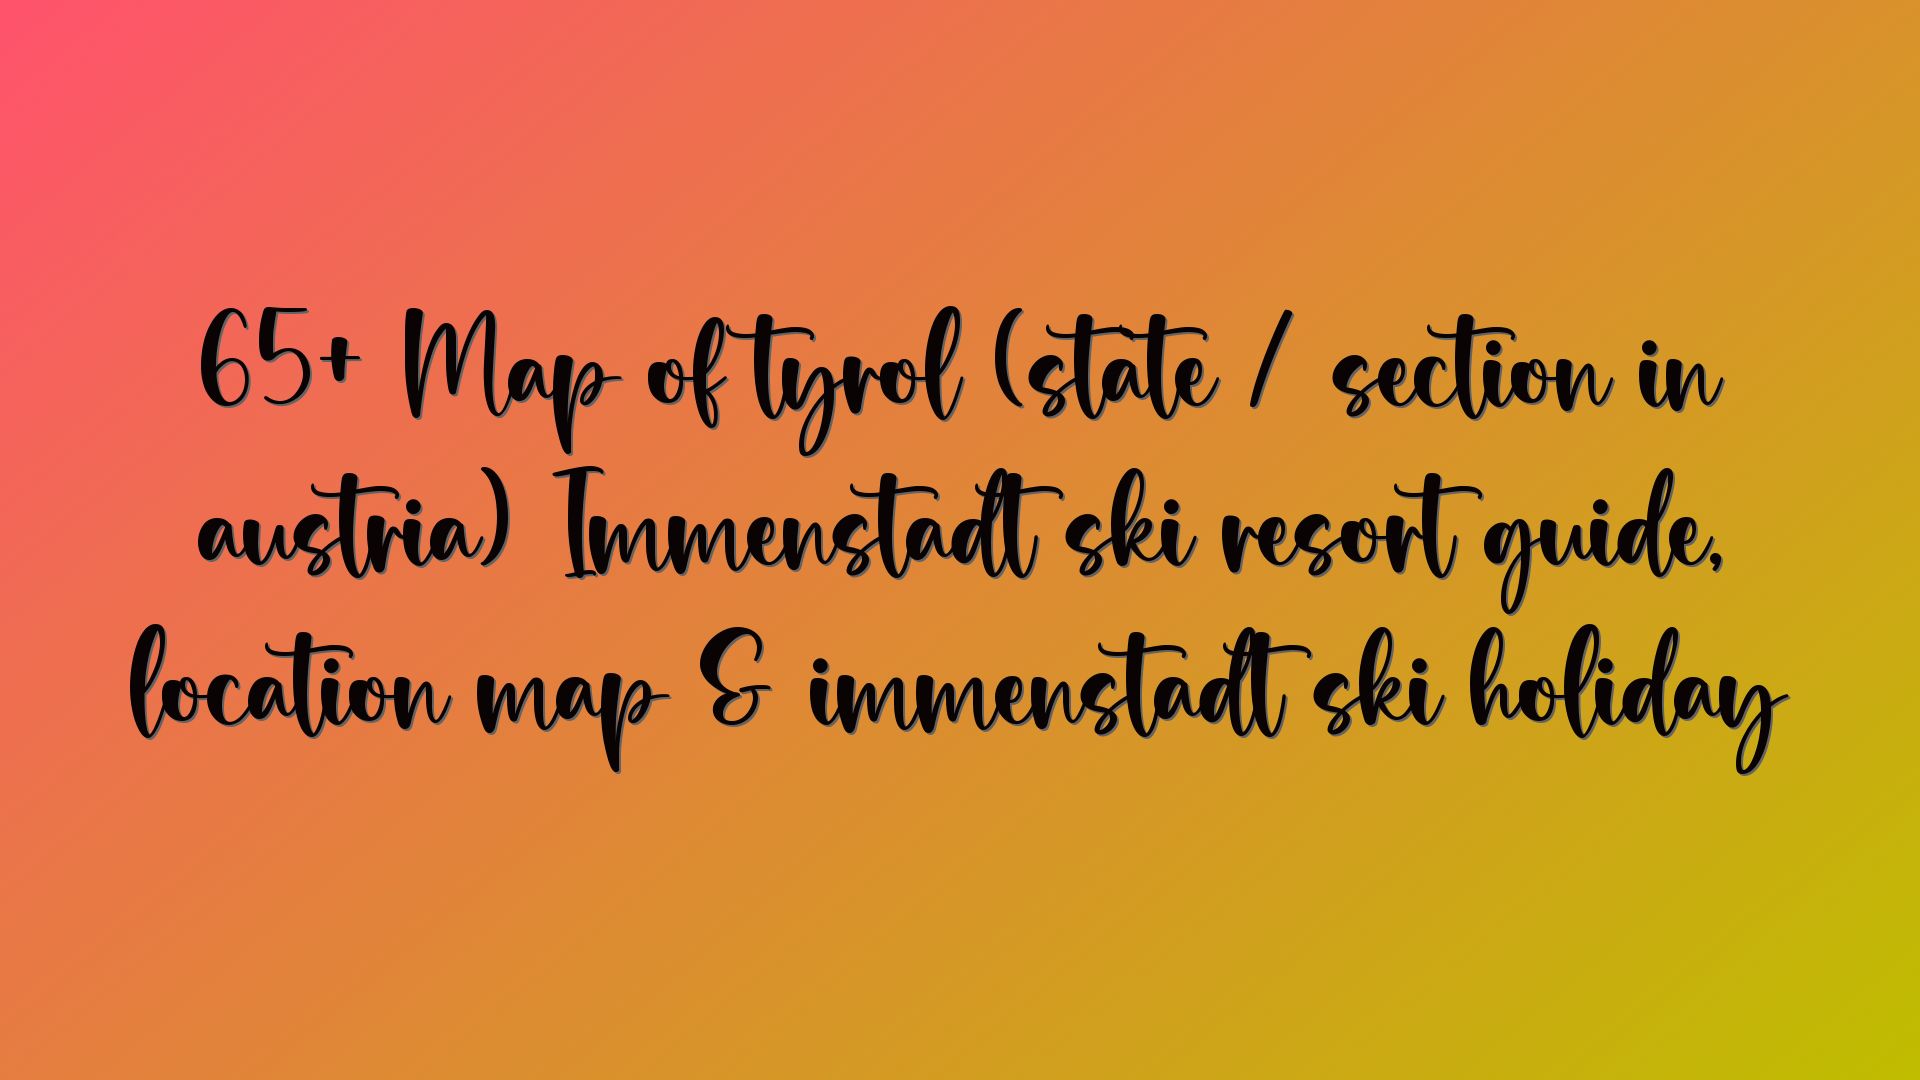 65+ Map of tyrol (state / section in austria) Immenstadt ski resort guide, location map & immenstadt ski holiday